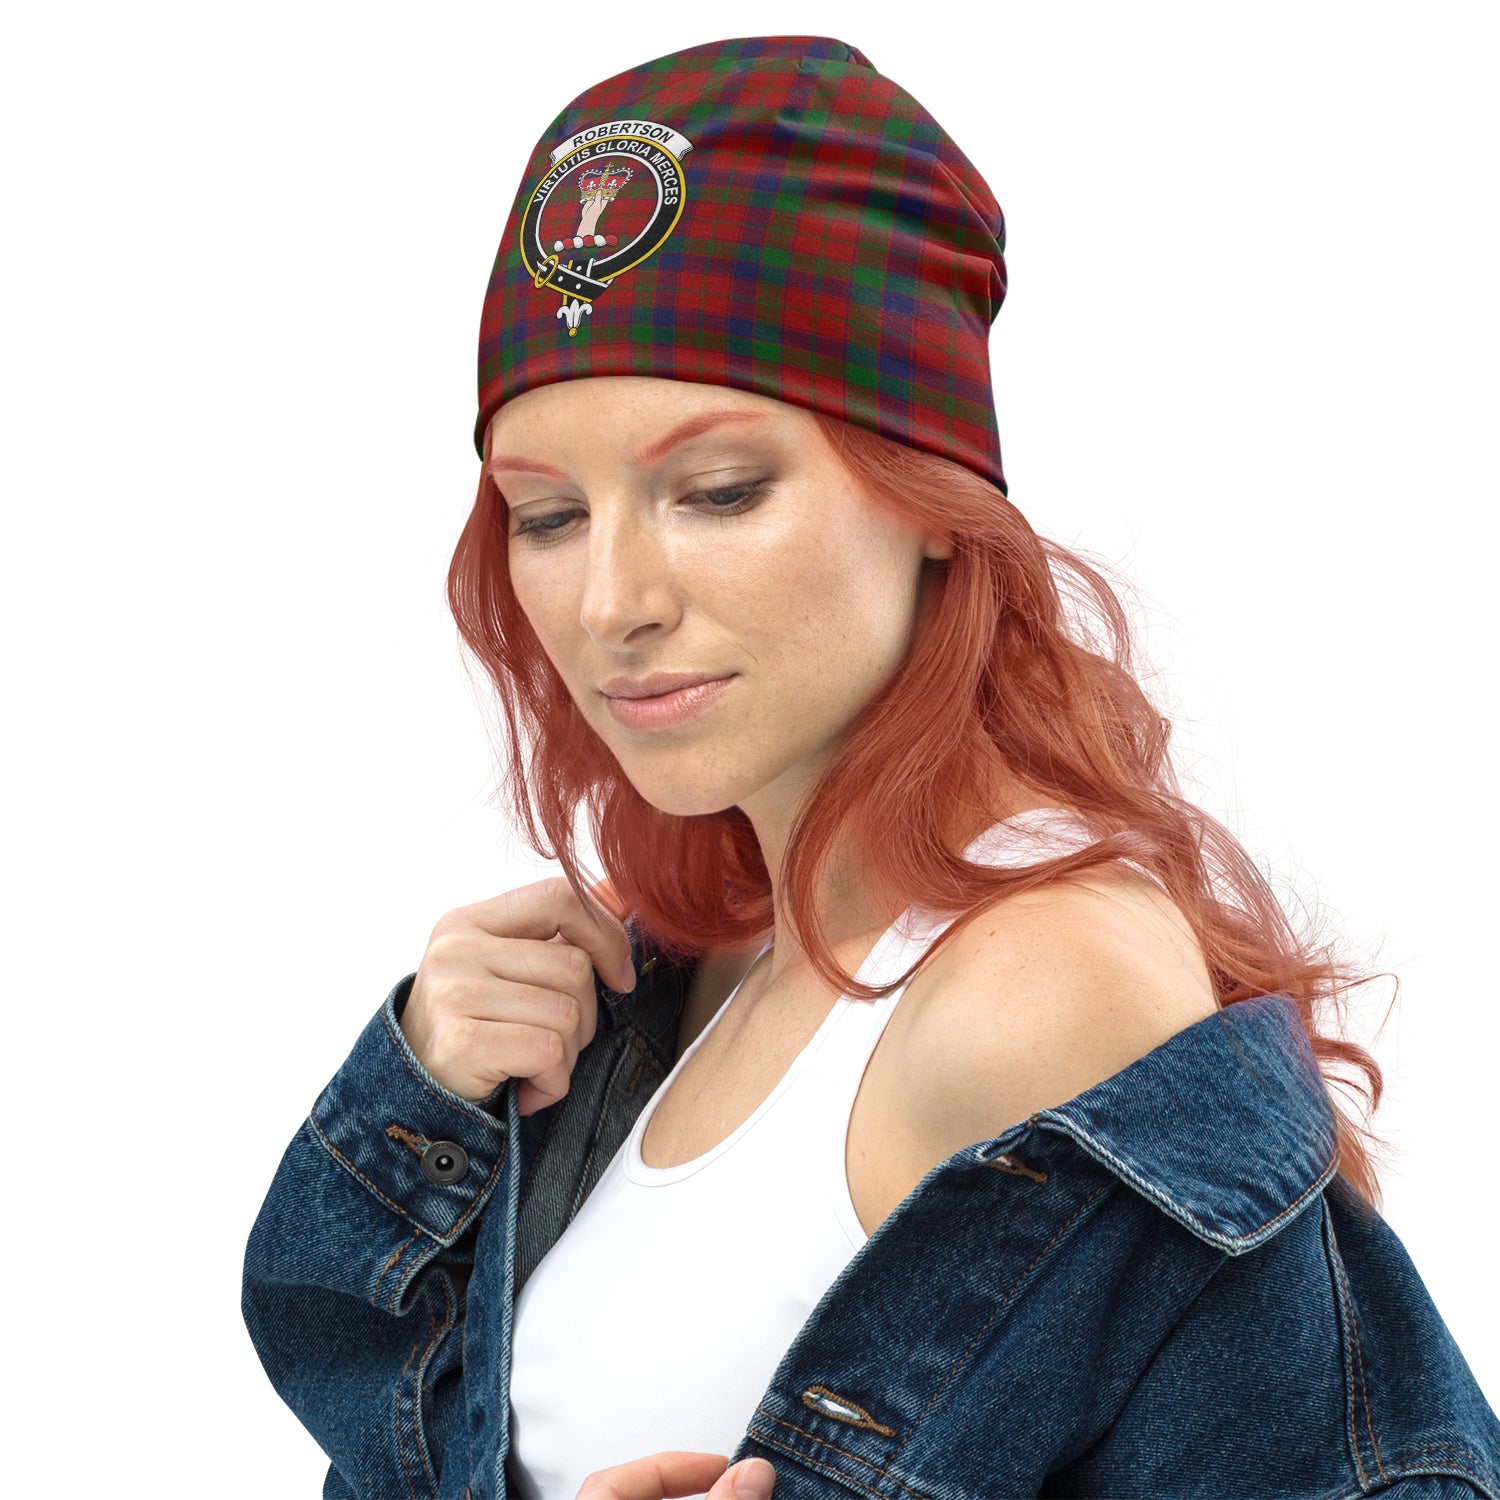 robertson-tartan-beanies-hat-with-family-crest